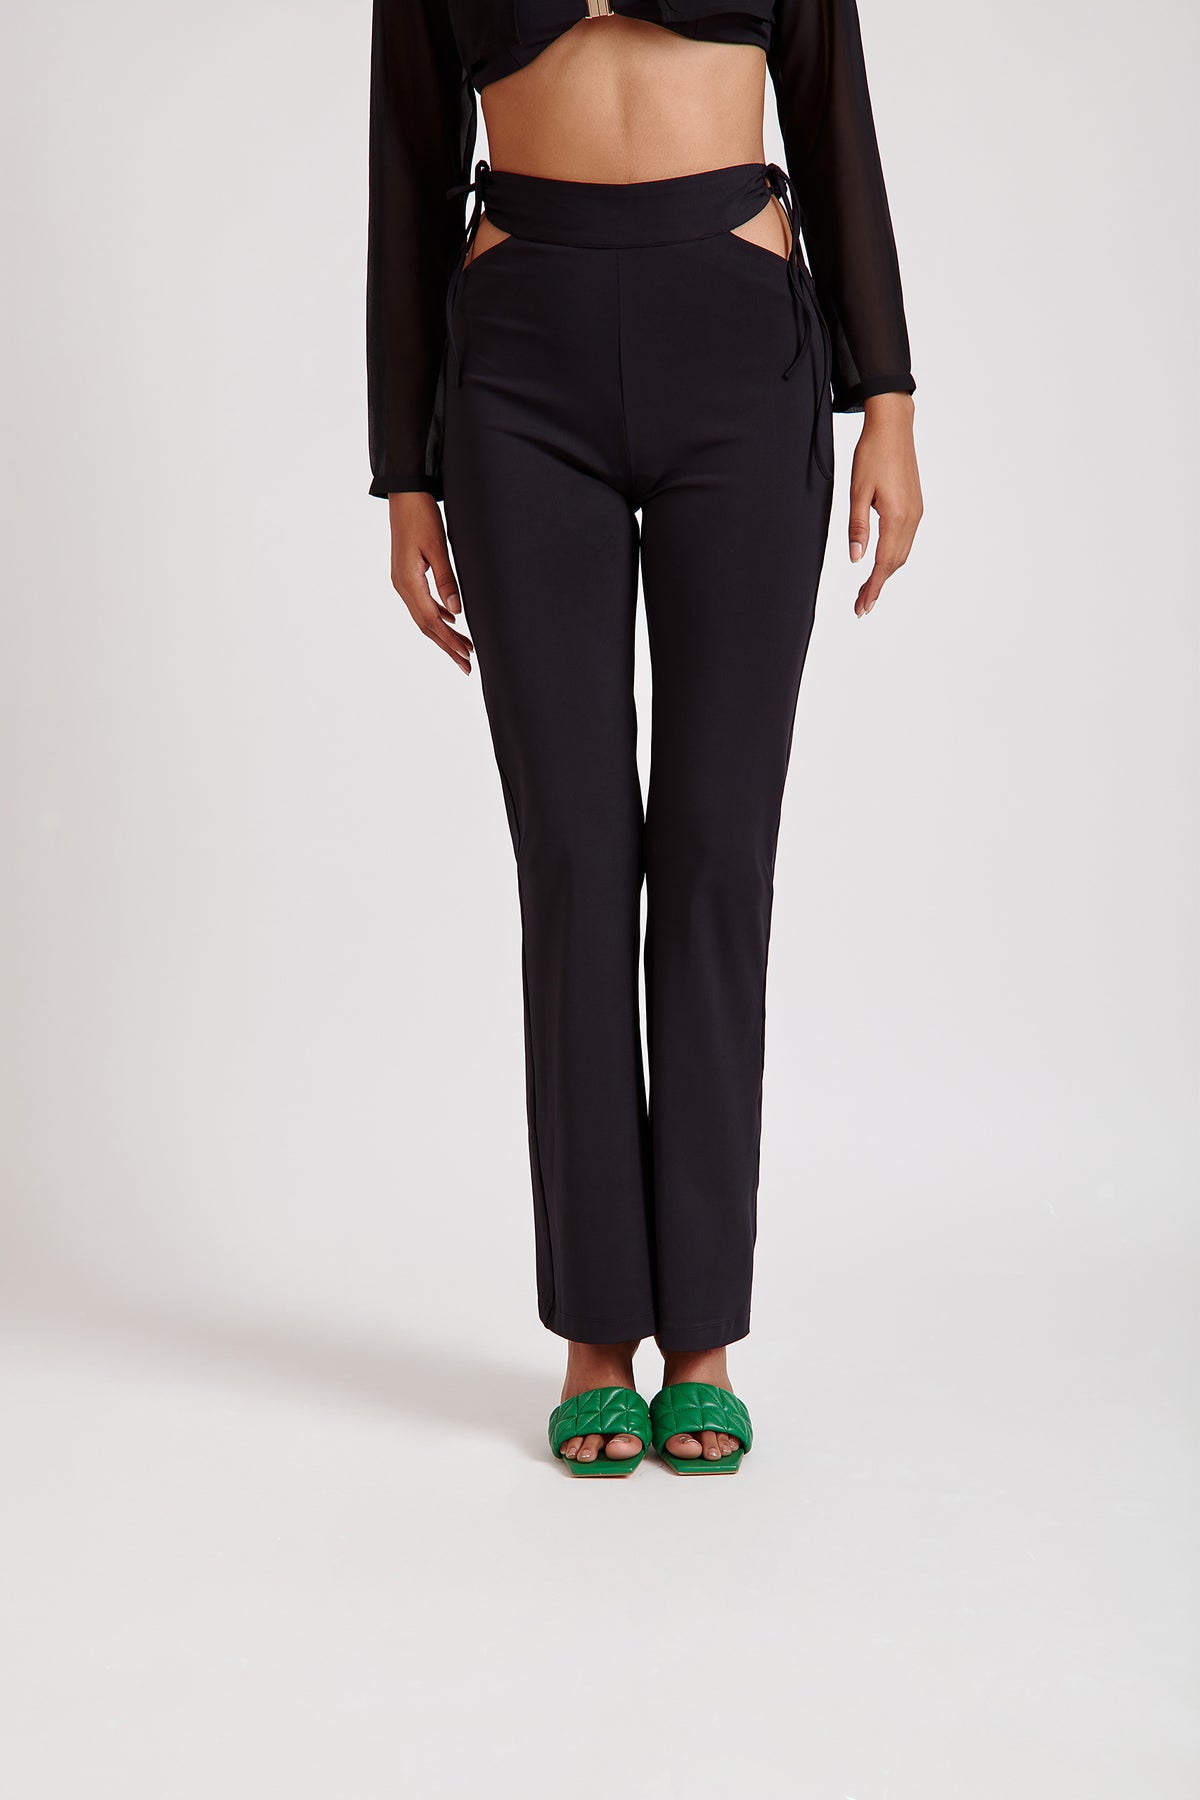 Flared Pants with Cut-Out Detail Black